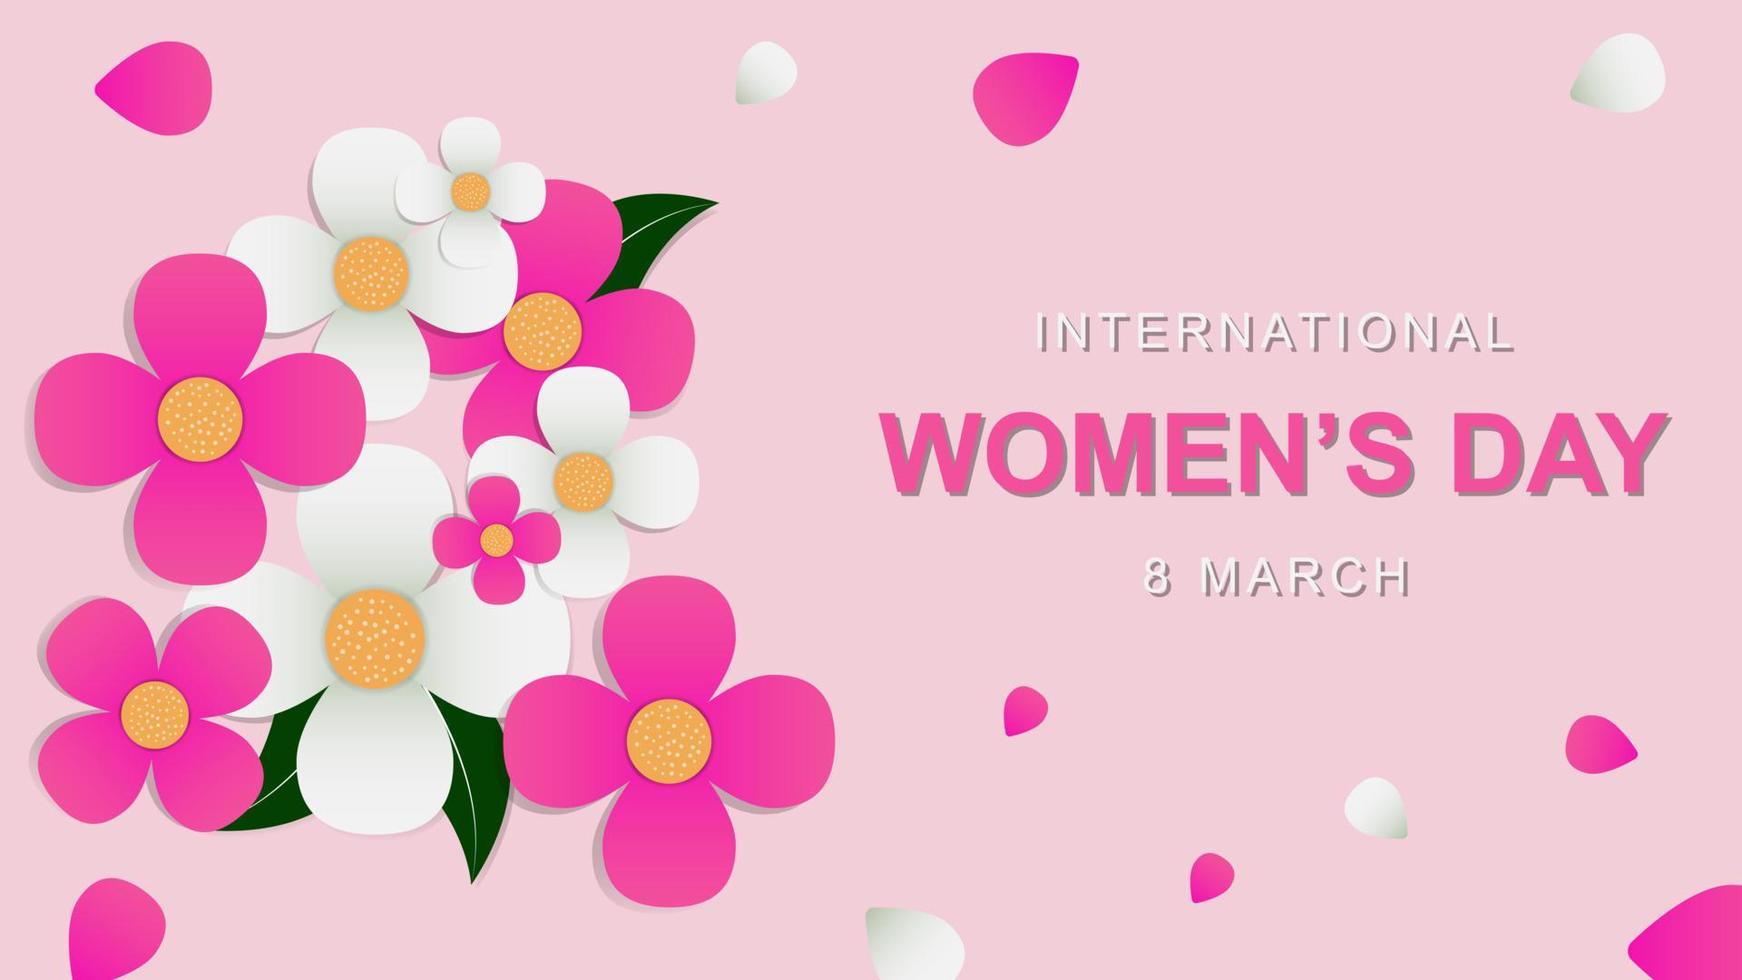 Happy international women's day 8 march floral decoration on pink background. Greeting card for women's day. Vector illustration. EPS 10.